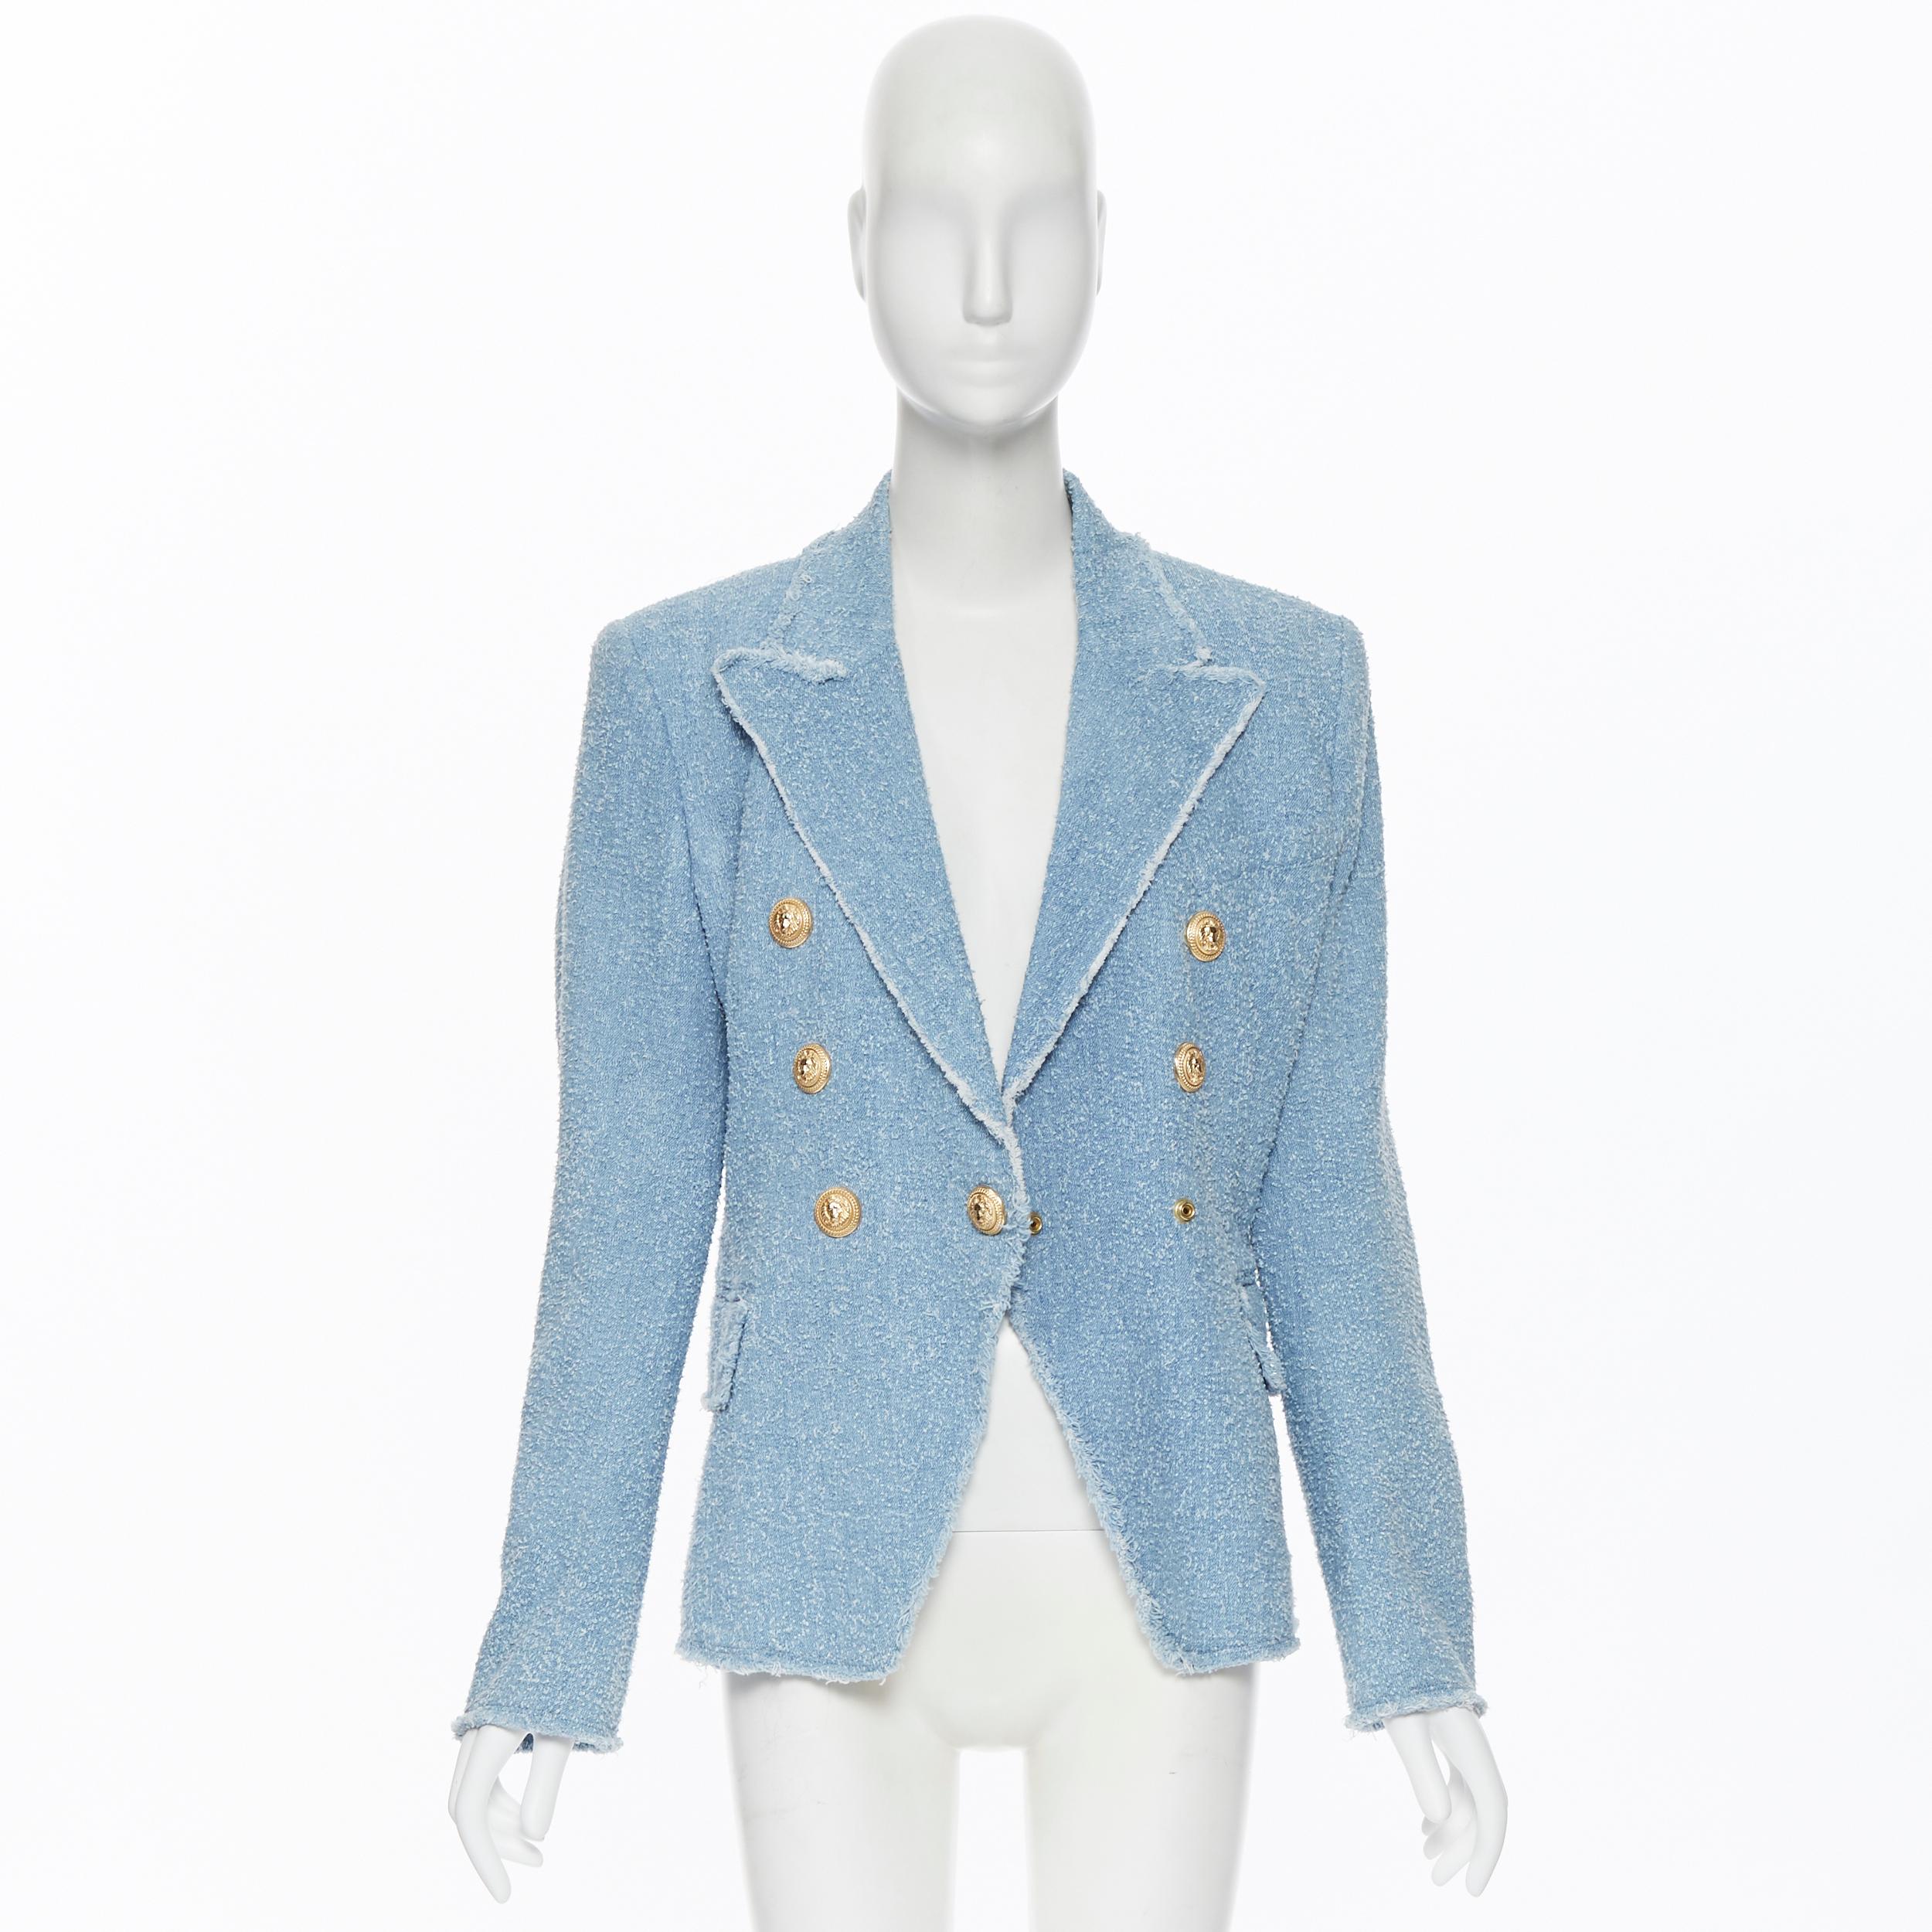 new BALMAIN blue cotton boucle tweed gold double breasted blazer jacket FR40  M
Brand: Balmain
Designer: Olivier Rousteing
Model Name / Style: Double breasted jacket
Material: Tweed
Color: Blue
Pattern: Solid
Closure: Button
Extra Detail: Cotton